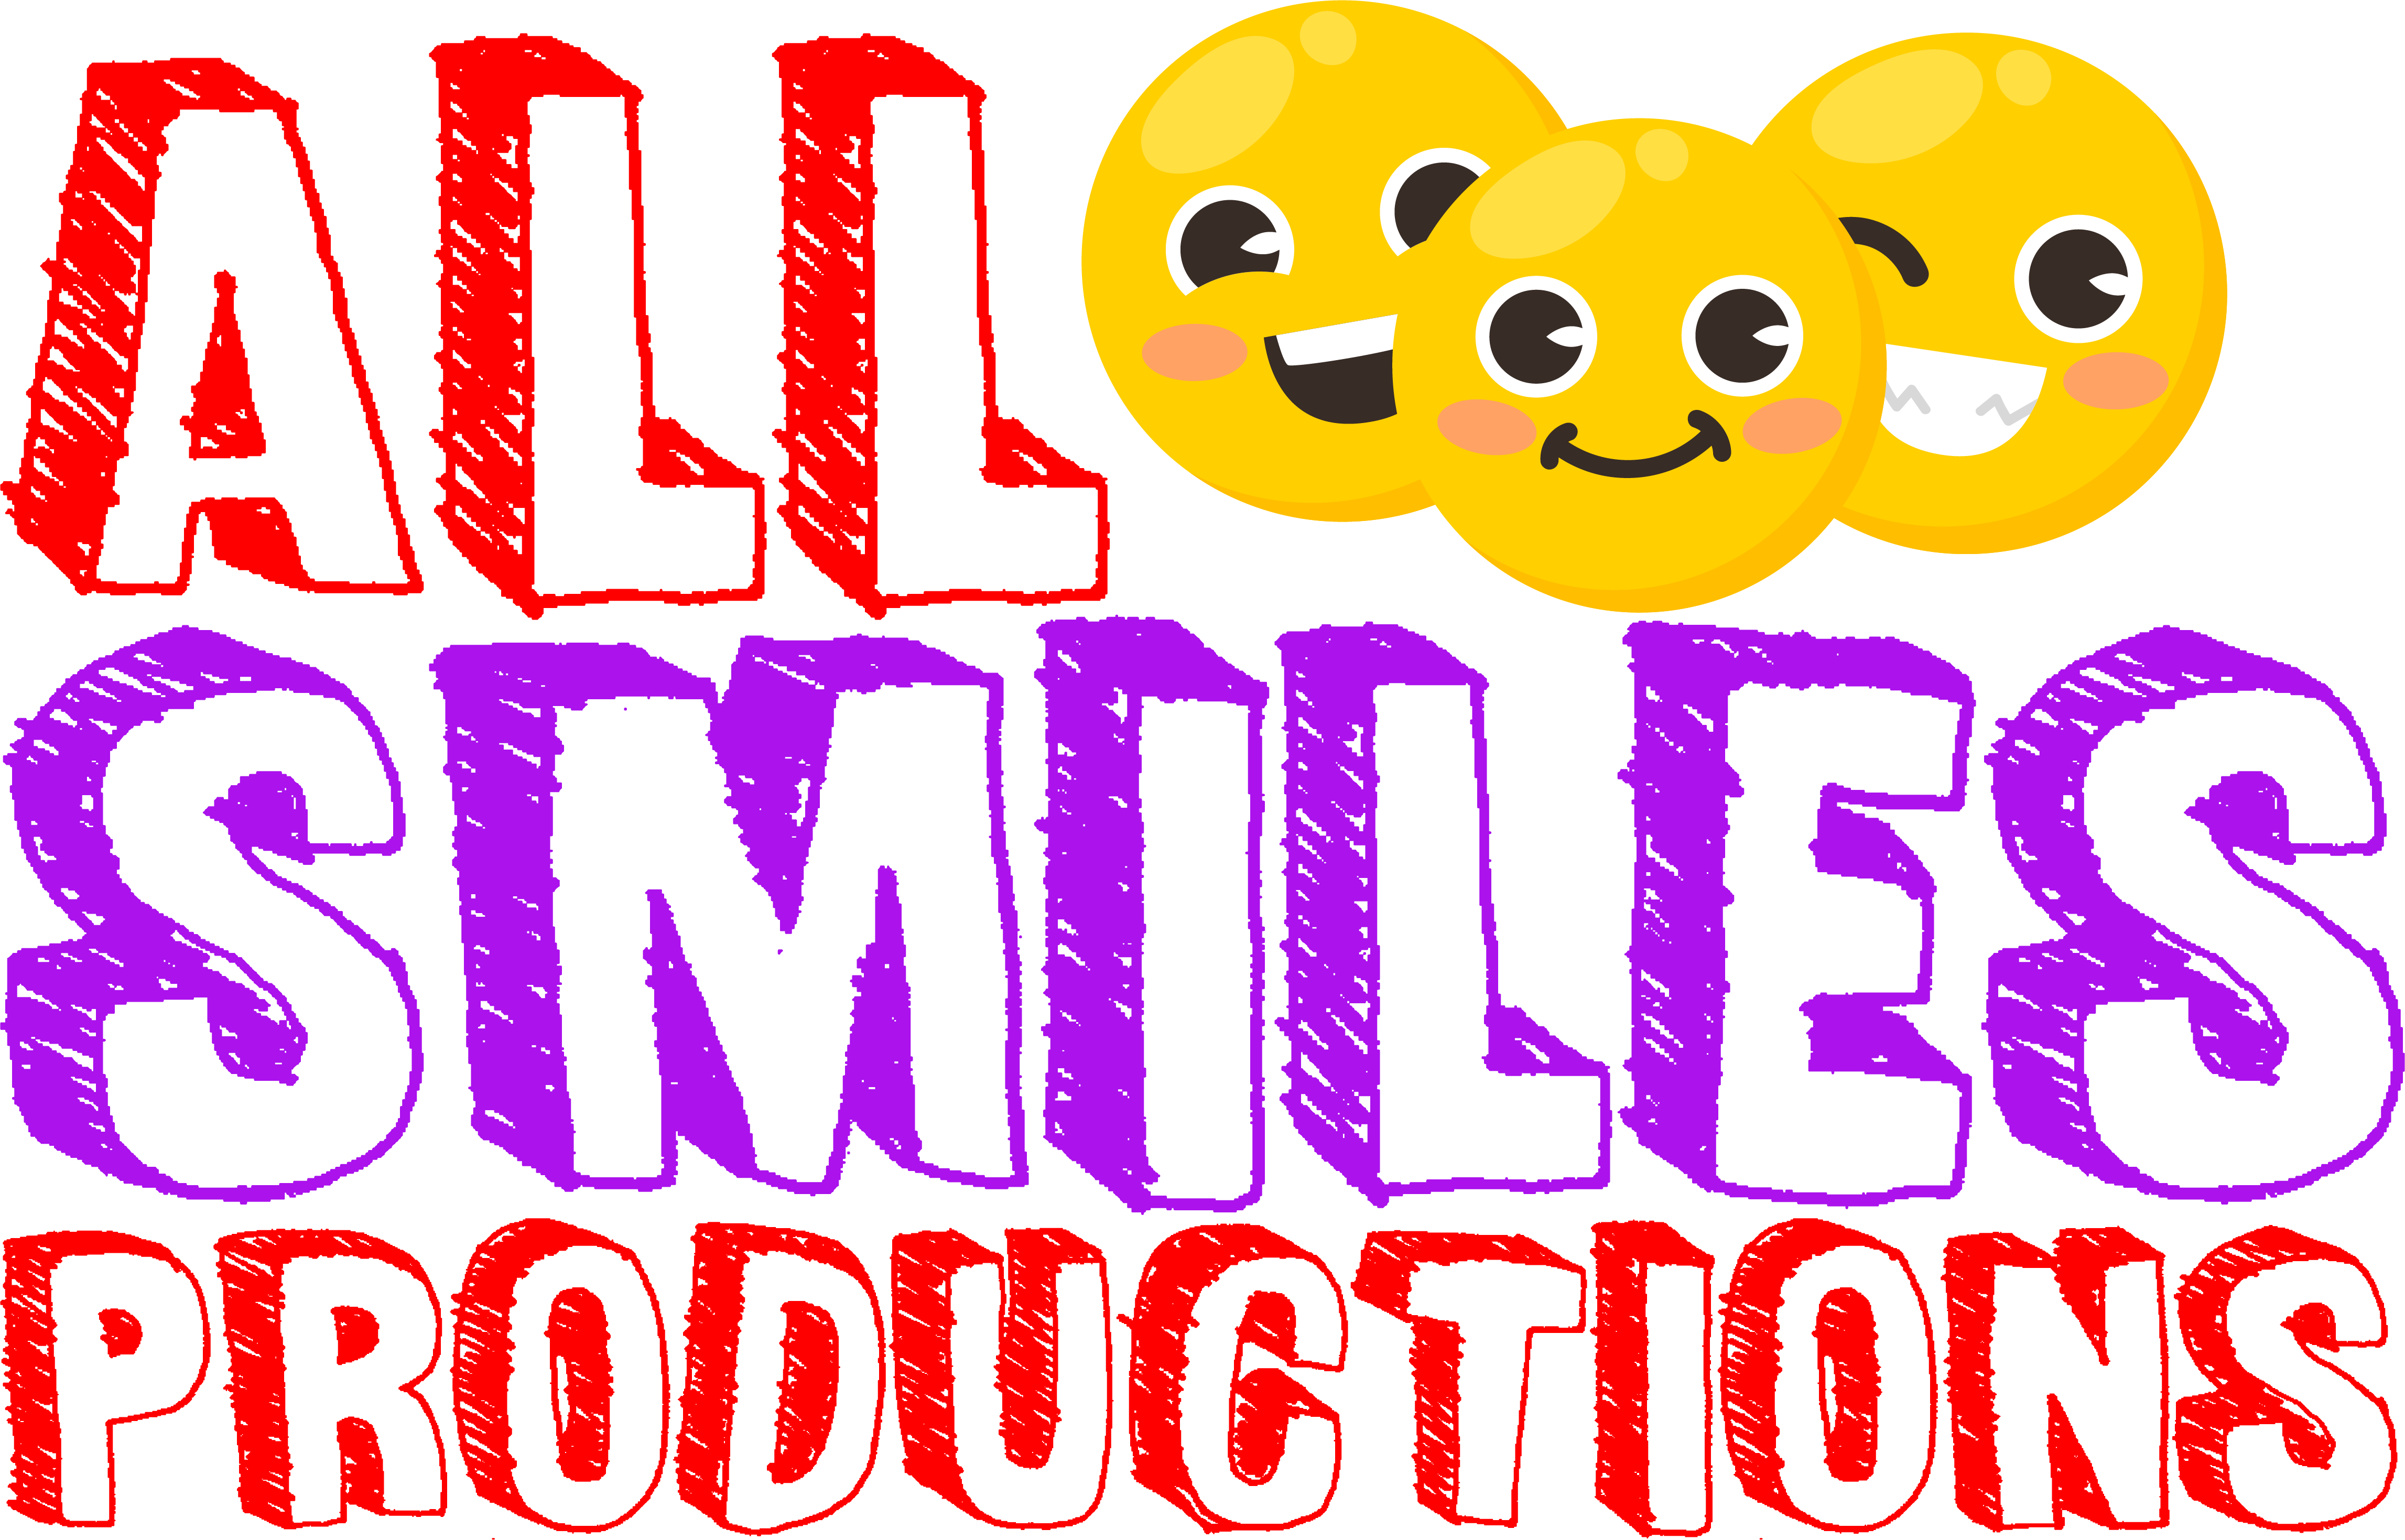 All Smiles Productions, LLC.